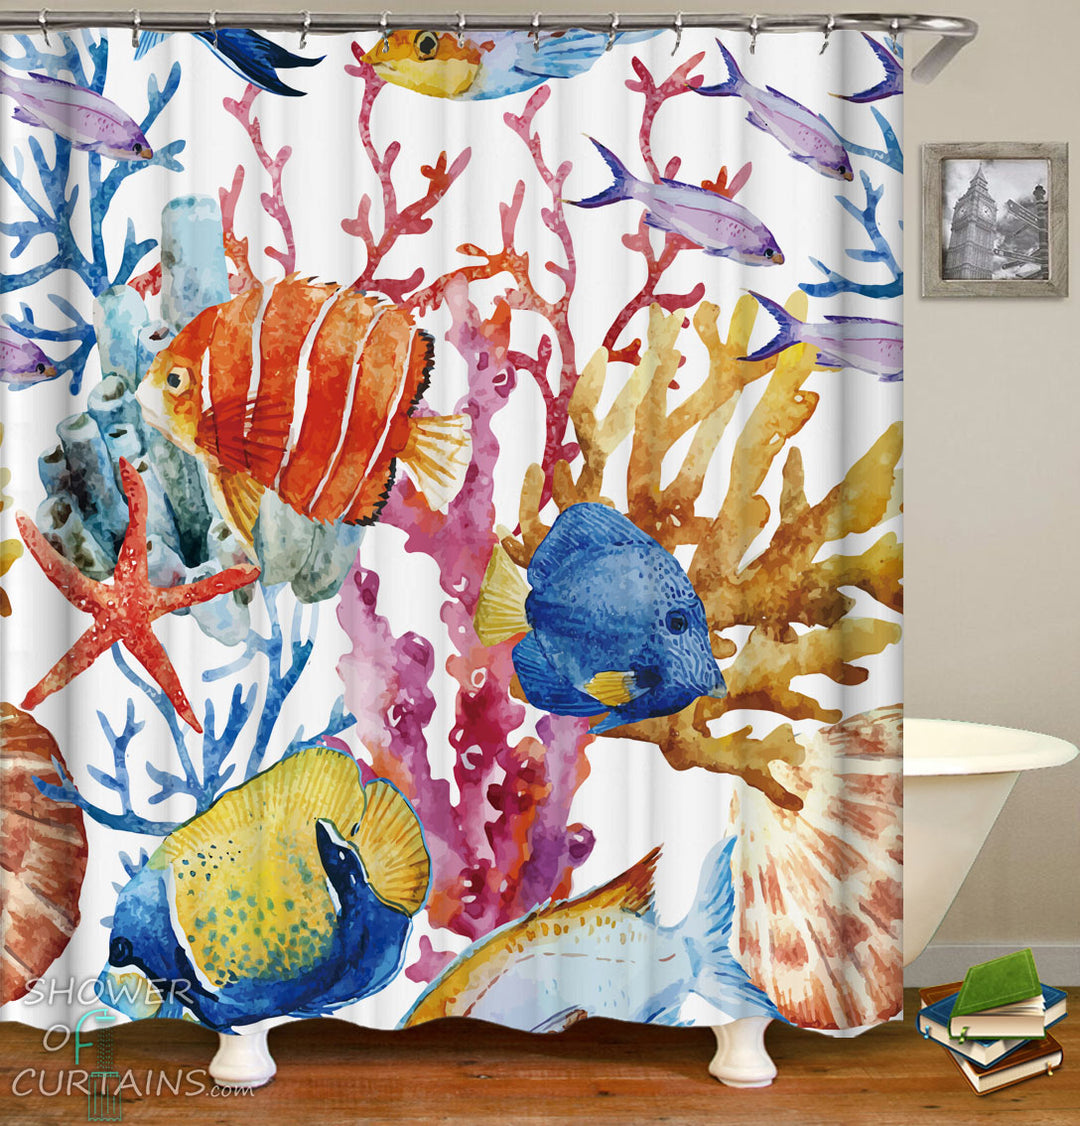 Colorful Shower Curtains of Colorful Coral And Fish Shower Curtain